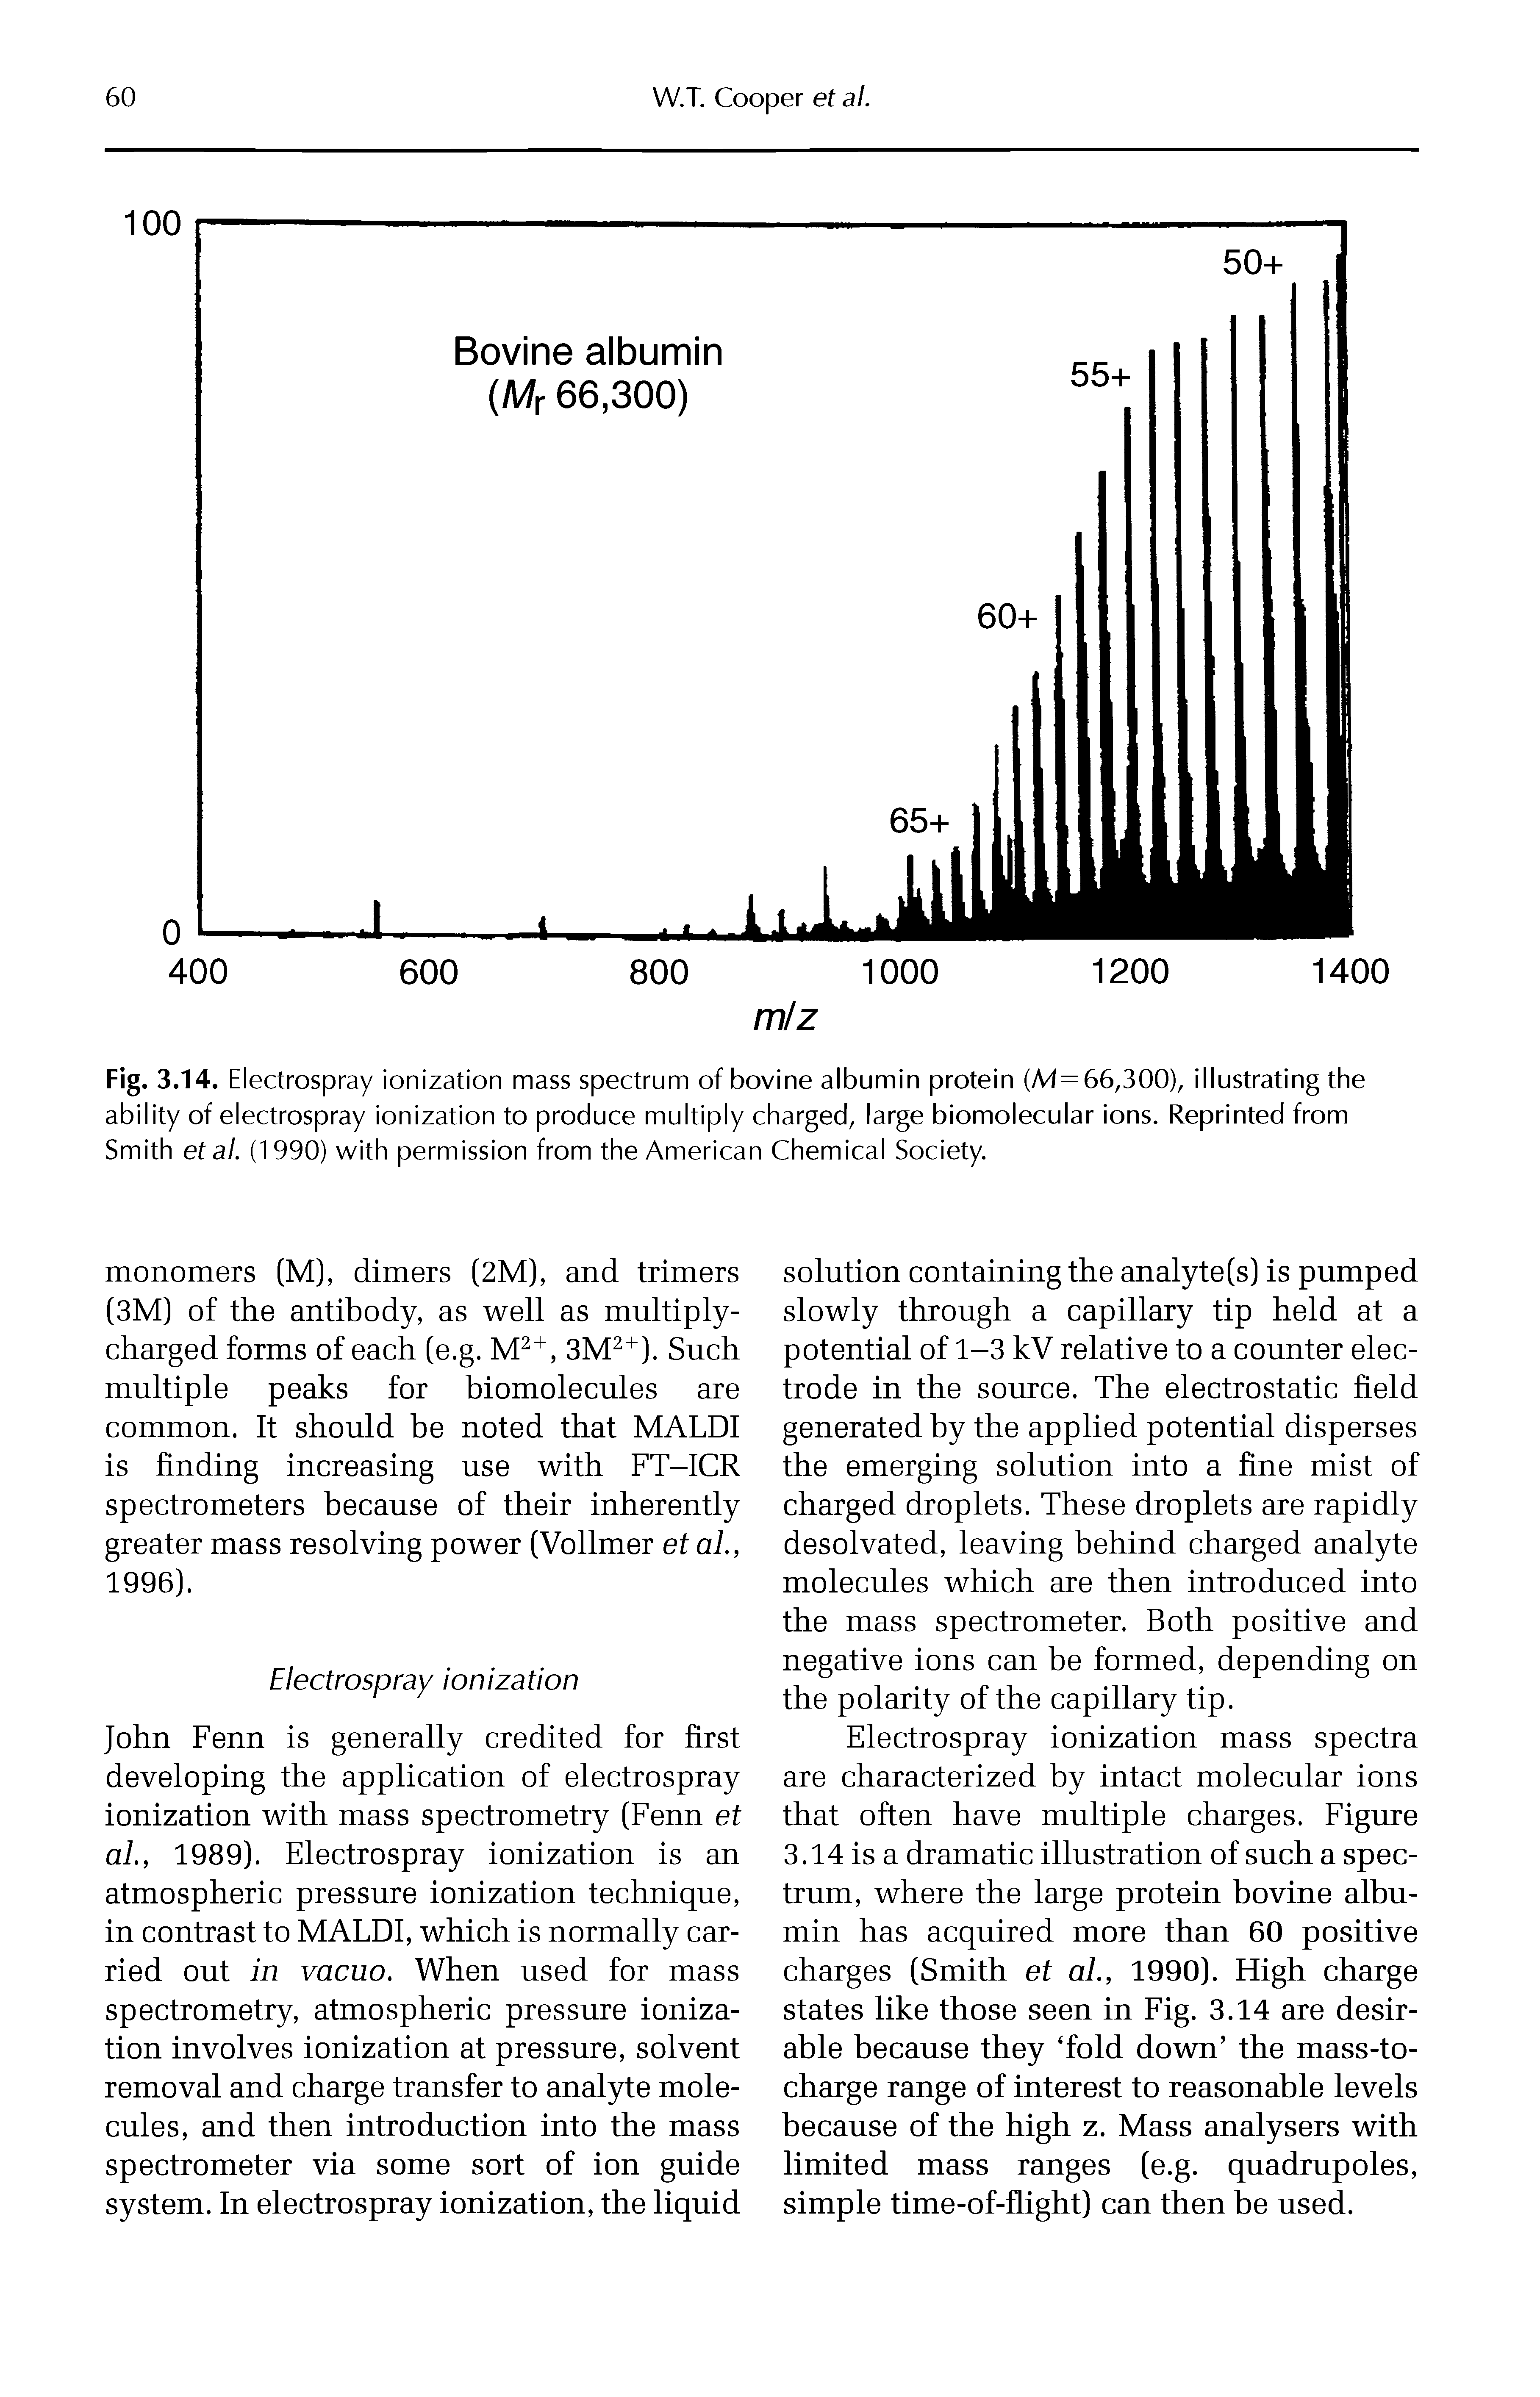 Fig. 3.14. Electrospray ionization mass spectrum of bovine albumin protein (A4= 66,300), illustrating the ability of electrospray ionization to produce multiply charged, large biomolecular ions. Reprinted from Smith et al. (1990) with permission from the American Chemical Society.